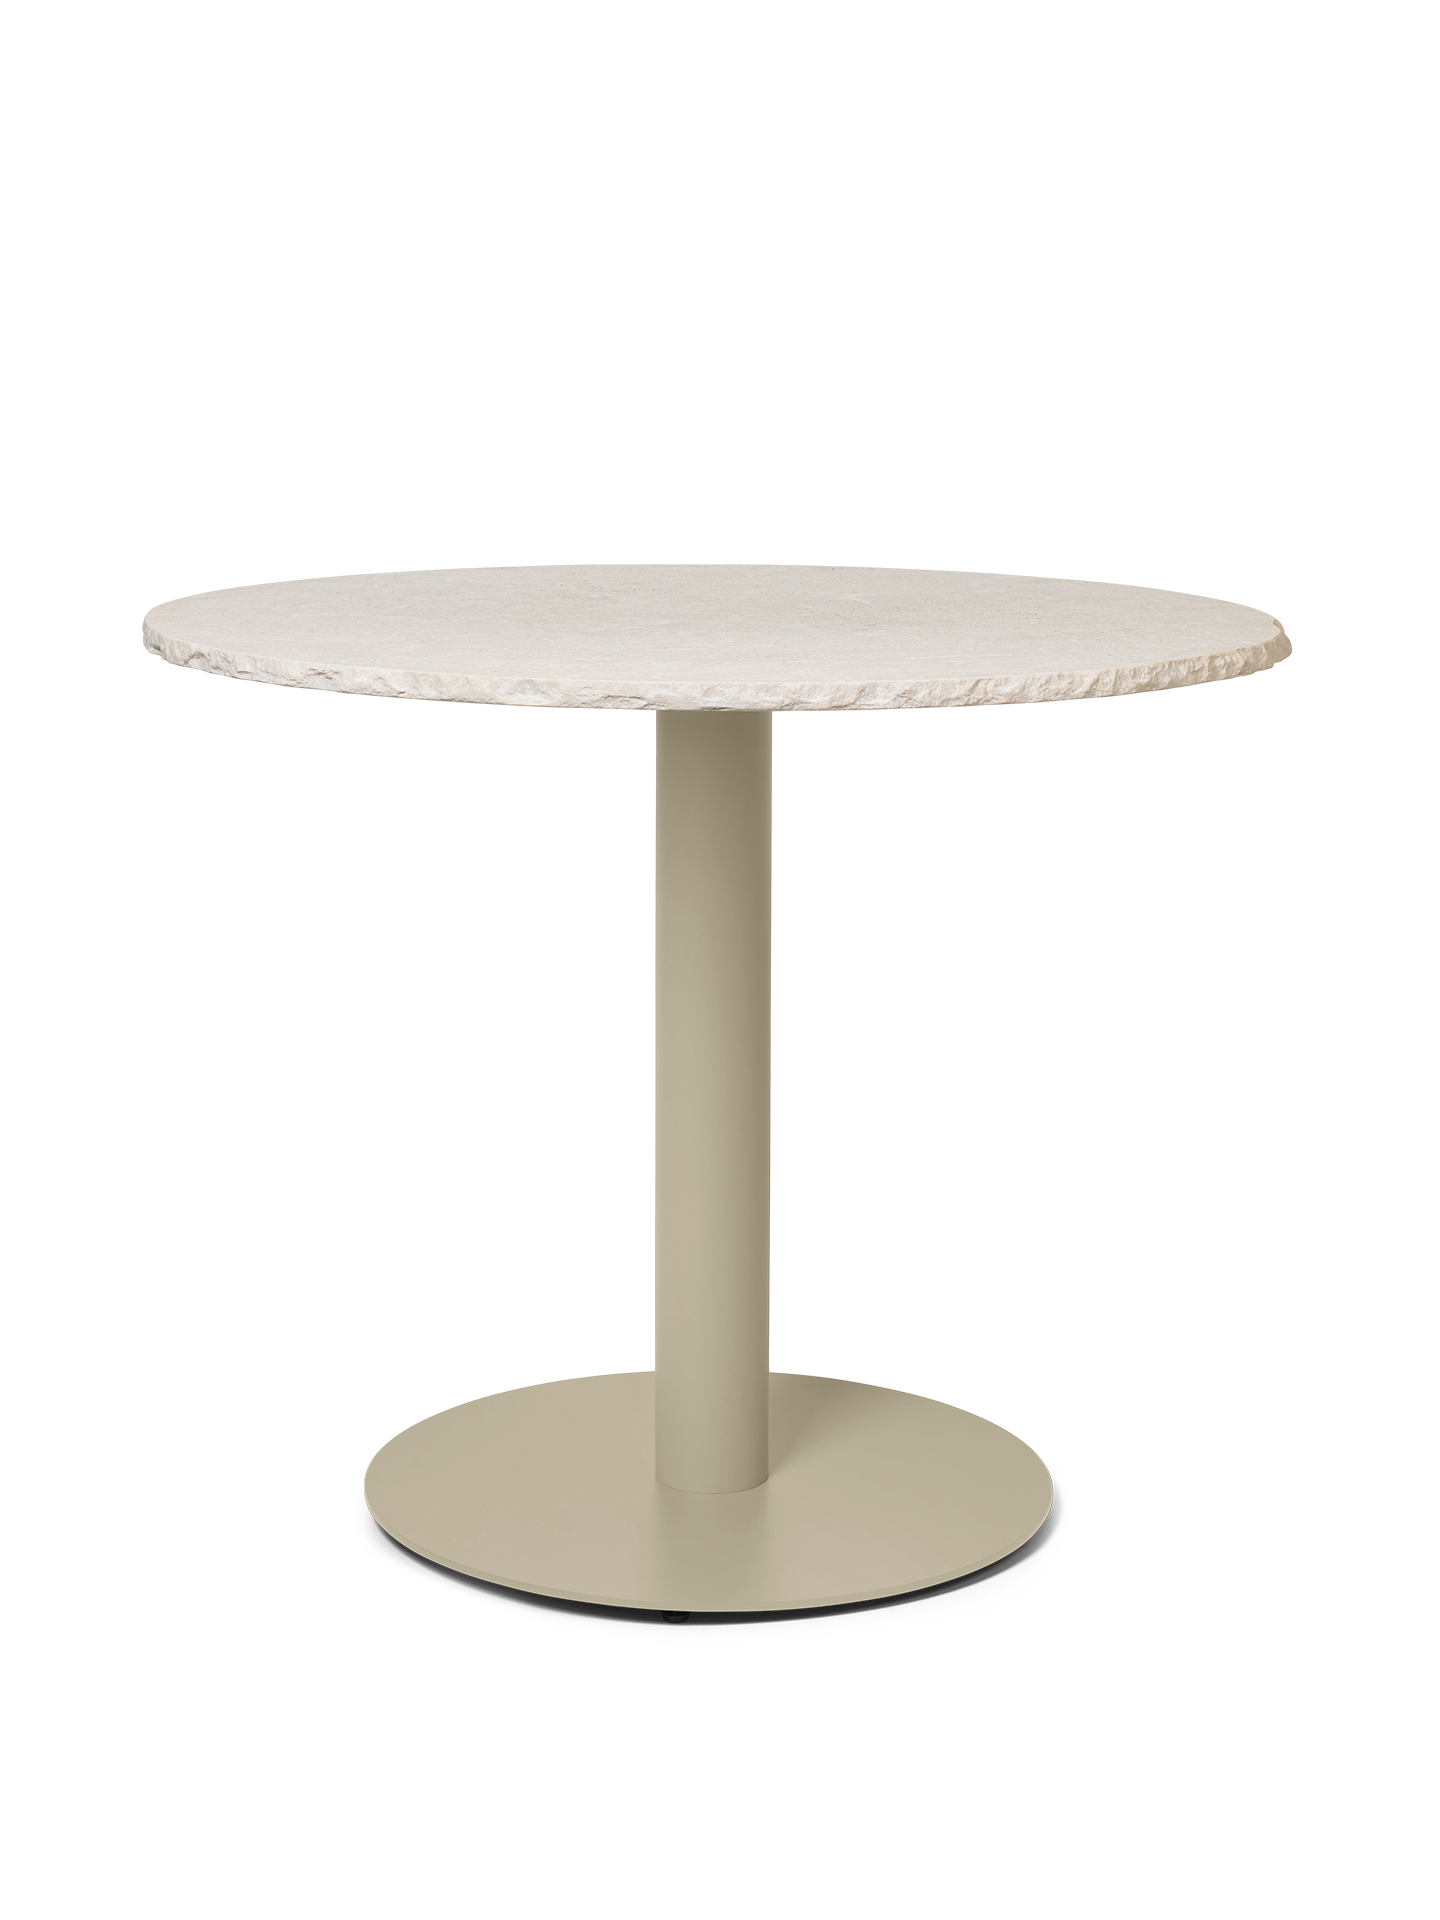 Ferm Living Mineral Dining Table Bianco Curia/Cashmere